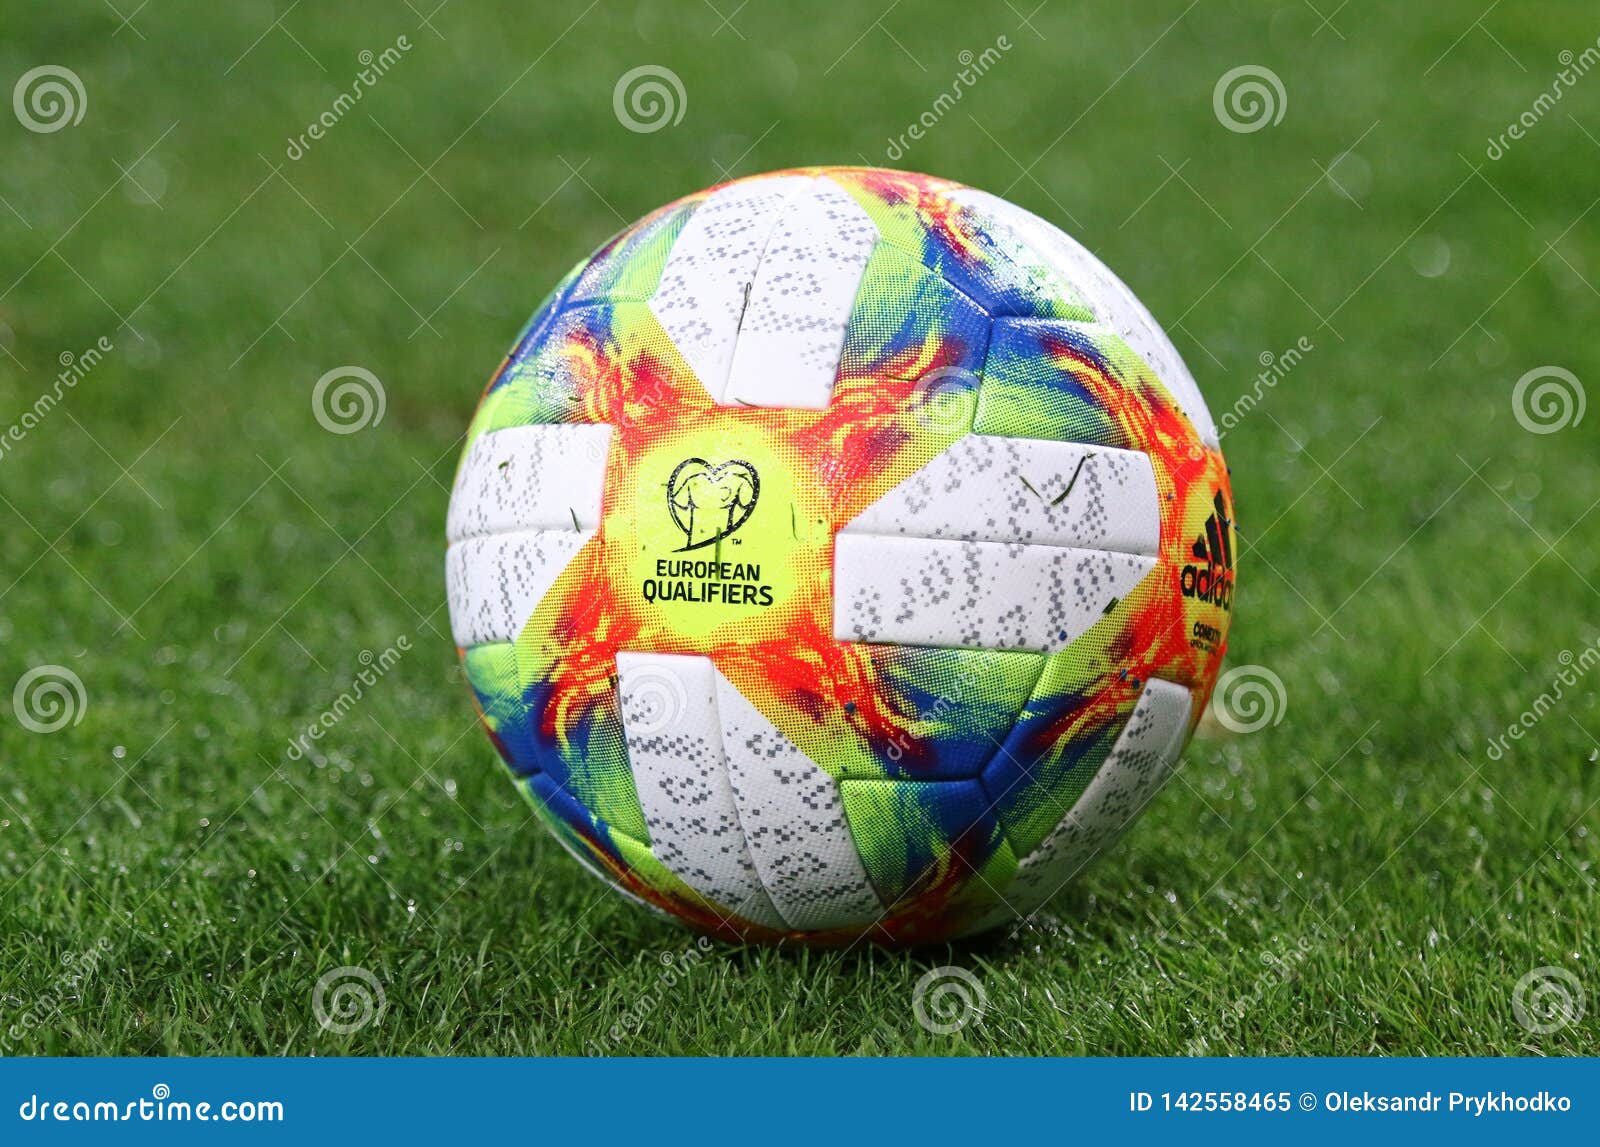 Official UEFA EURO-2020 Qualifiers Match Ball Editorial ...